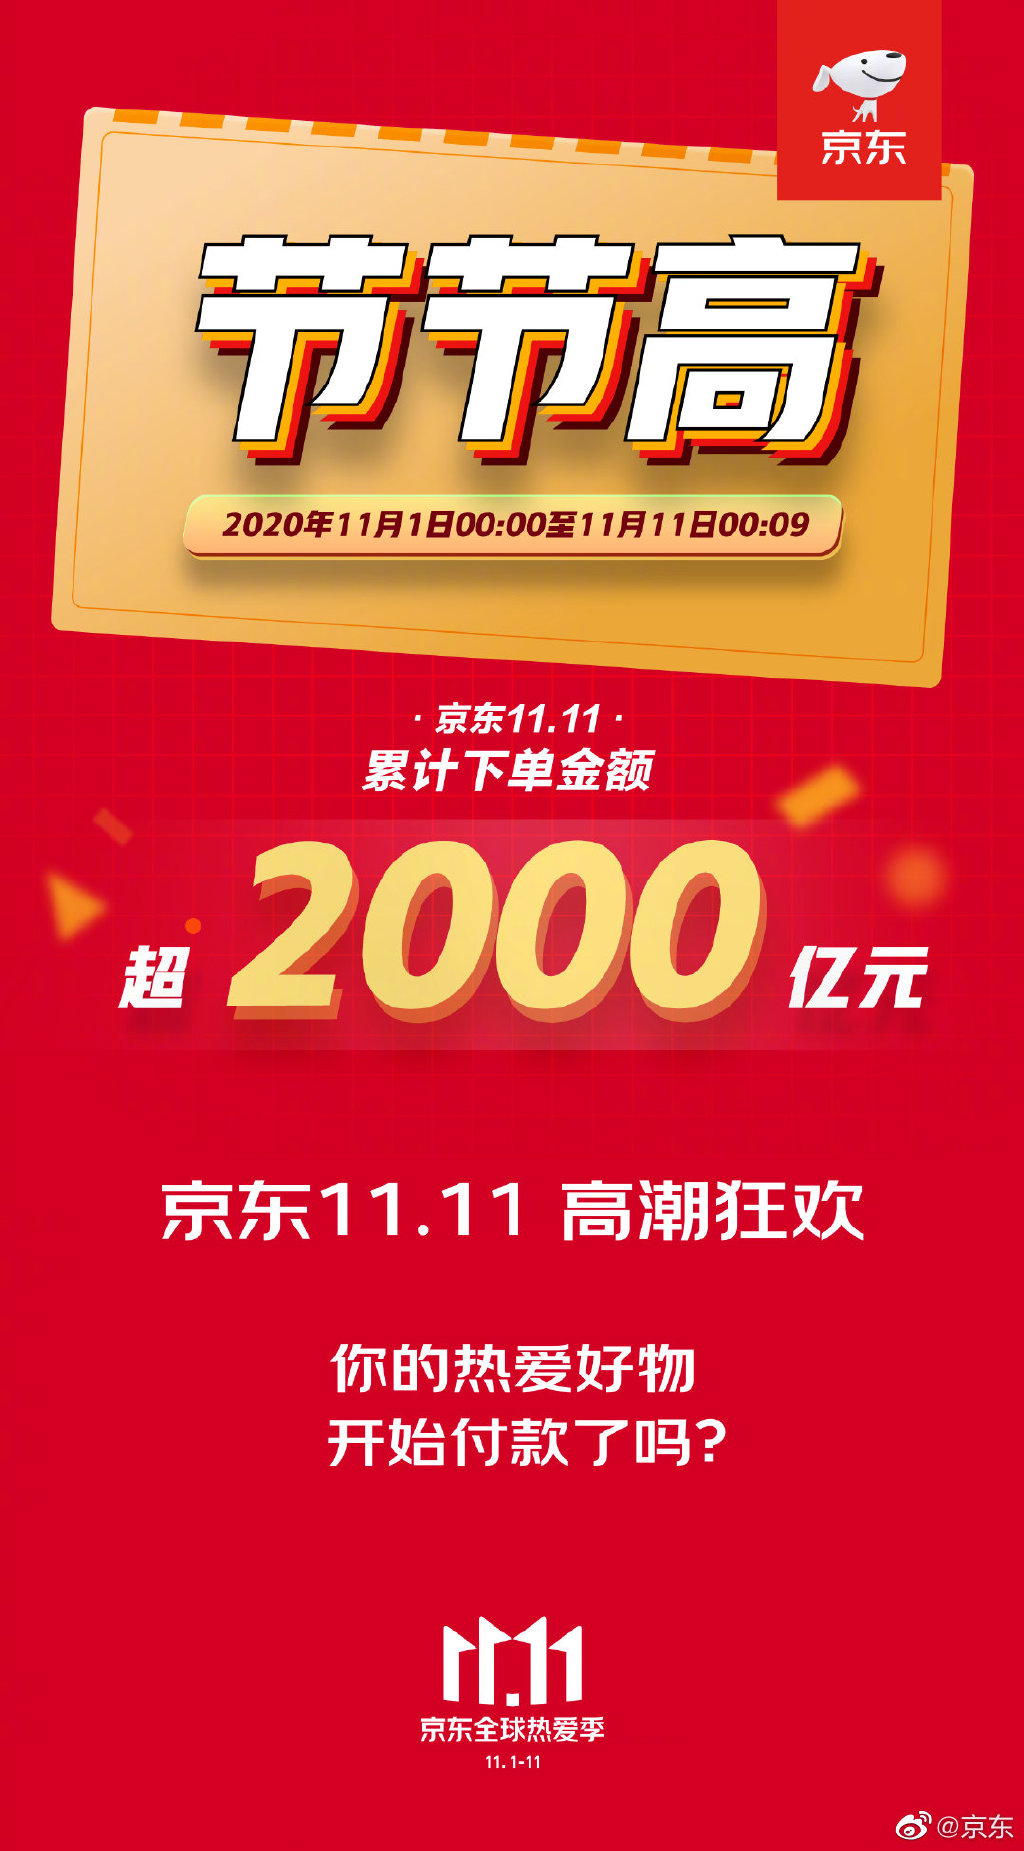 What you must know about the double 11 shopping festival 2020